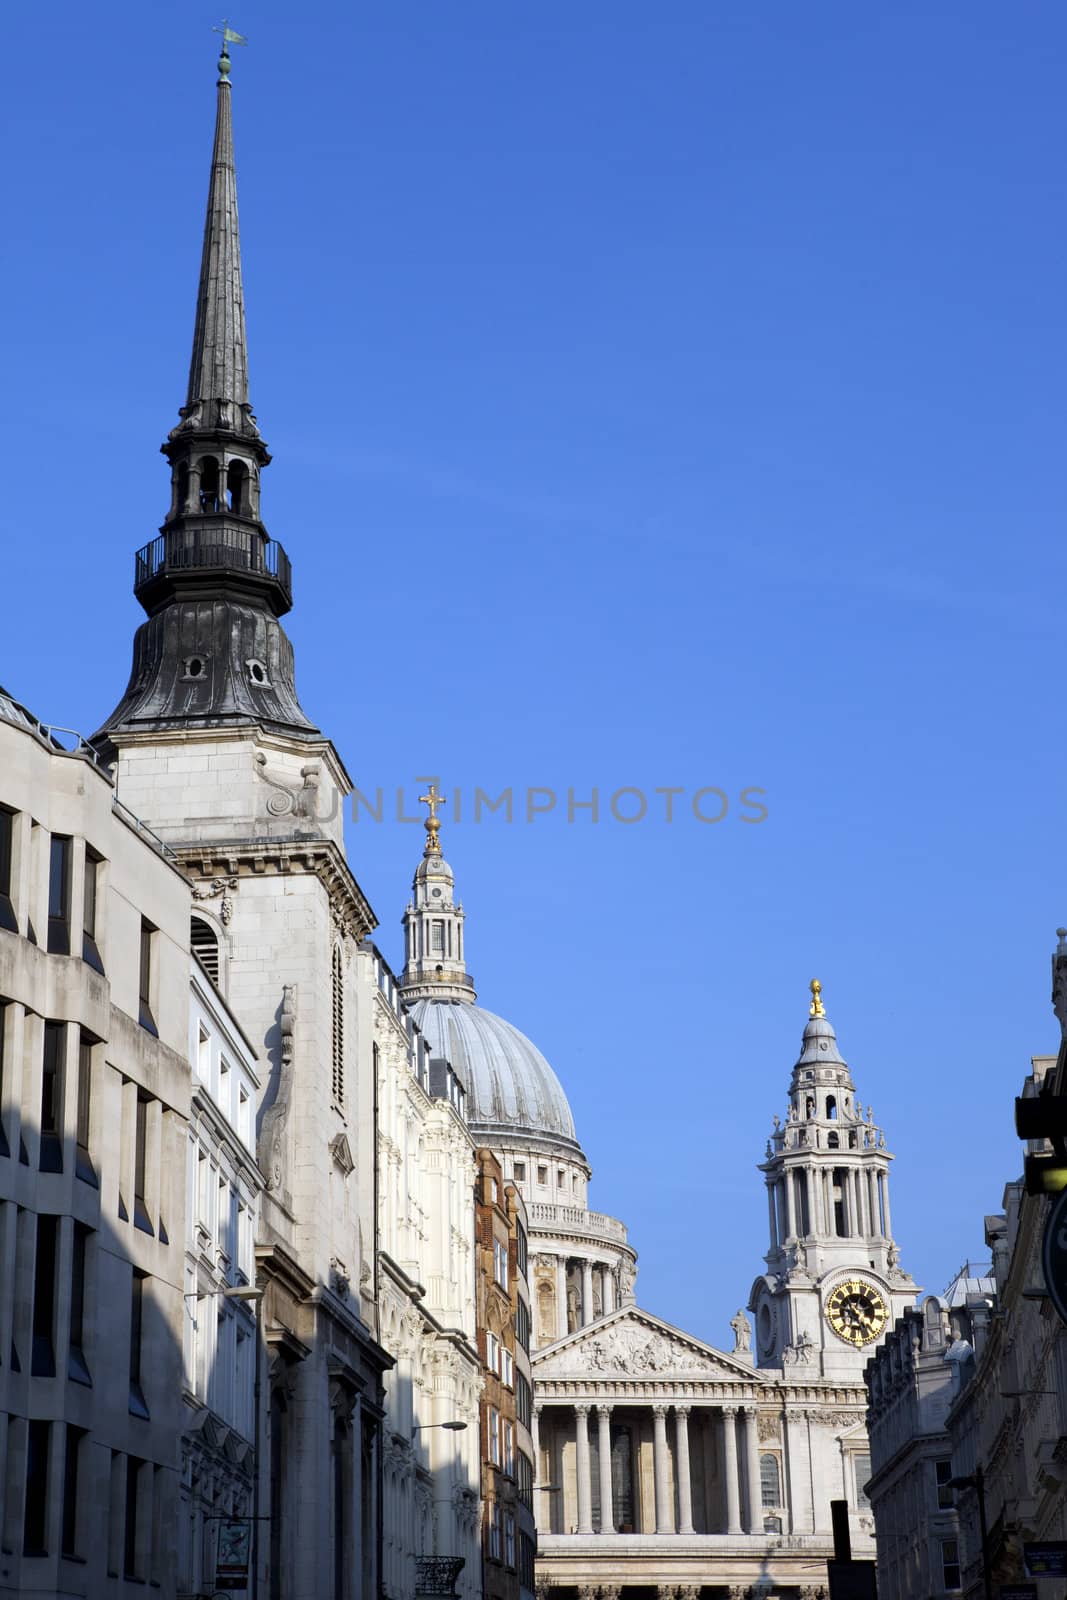 View of St Martin within Ludgate and St. Paul's Cathedral from Ludgate Hill in London.